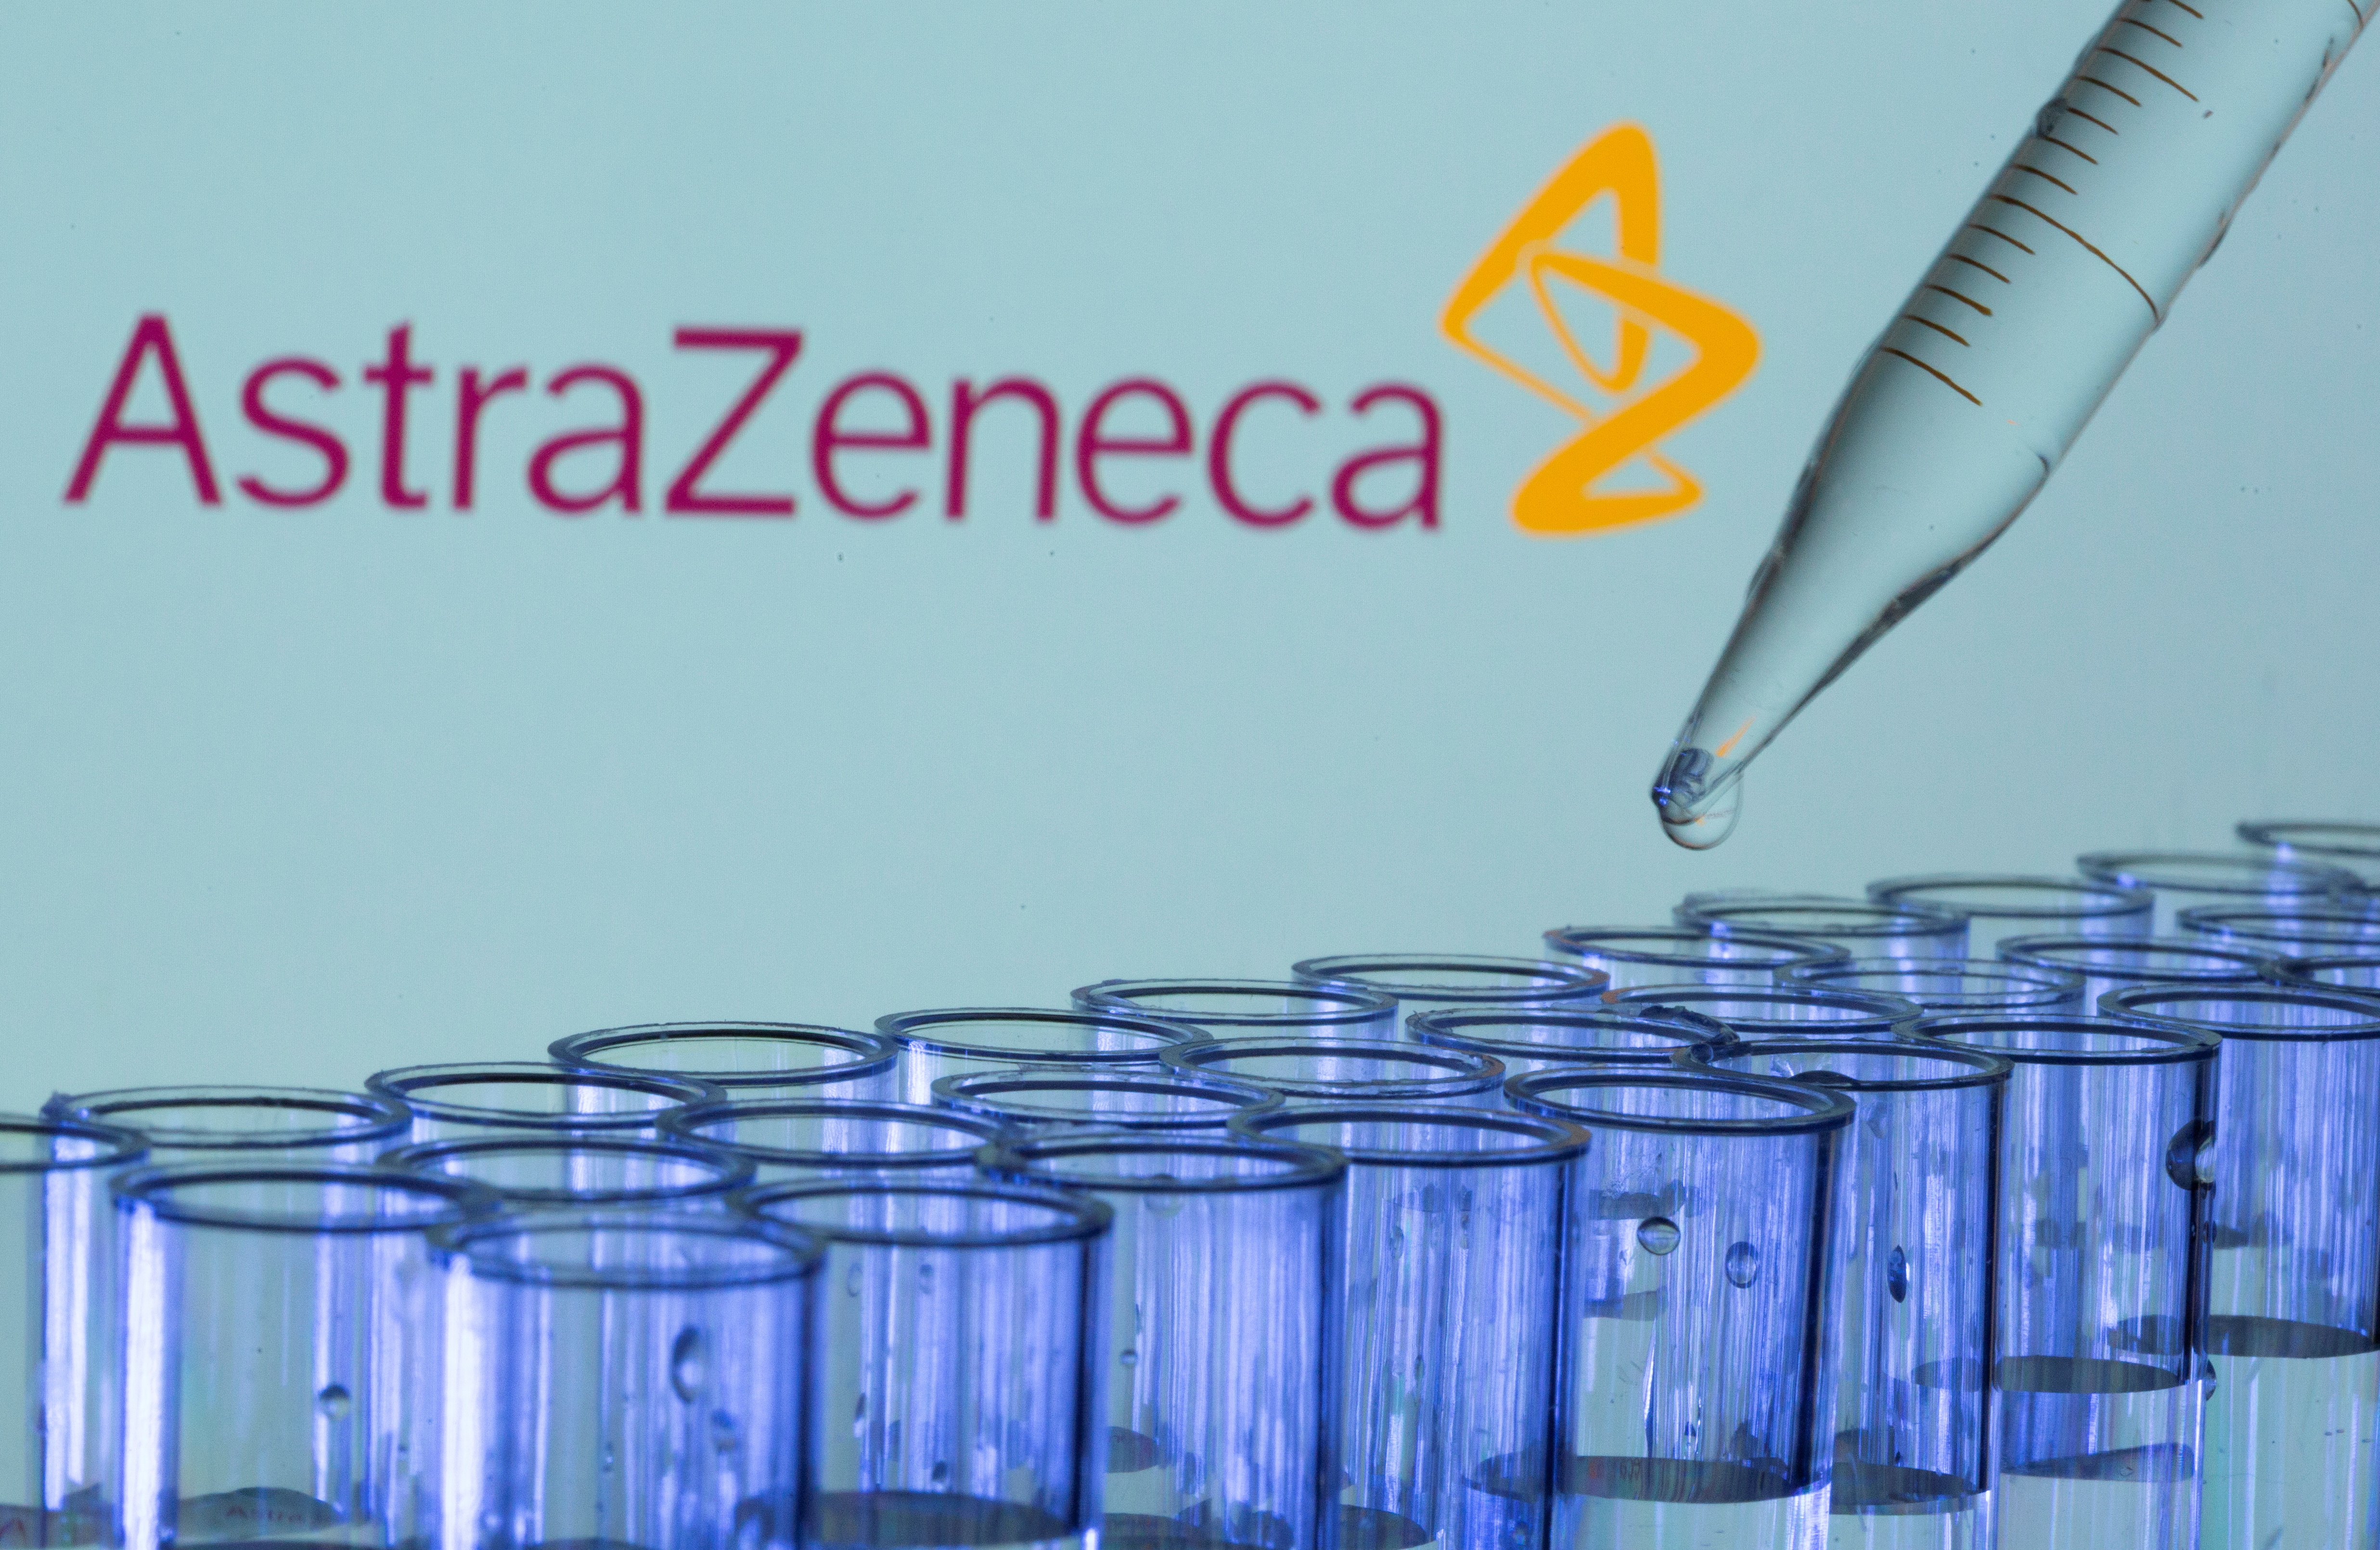 Test tubes are seen in front of a displayed AstraZeneca logo in this illustration